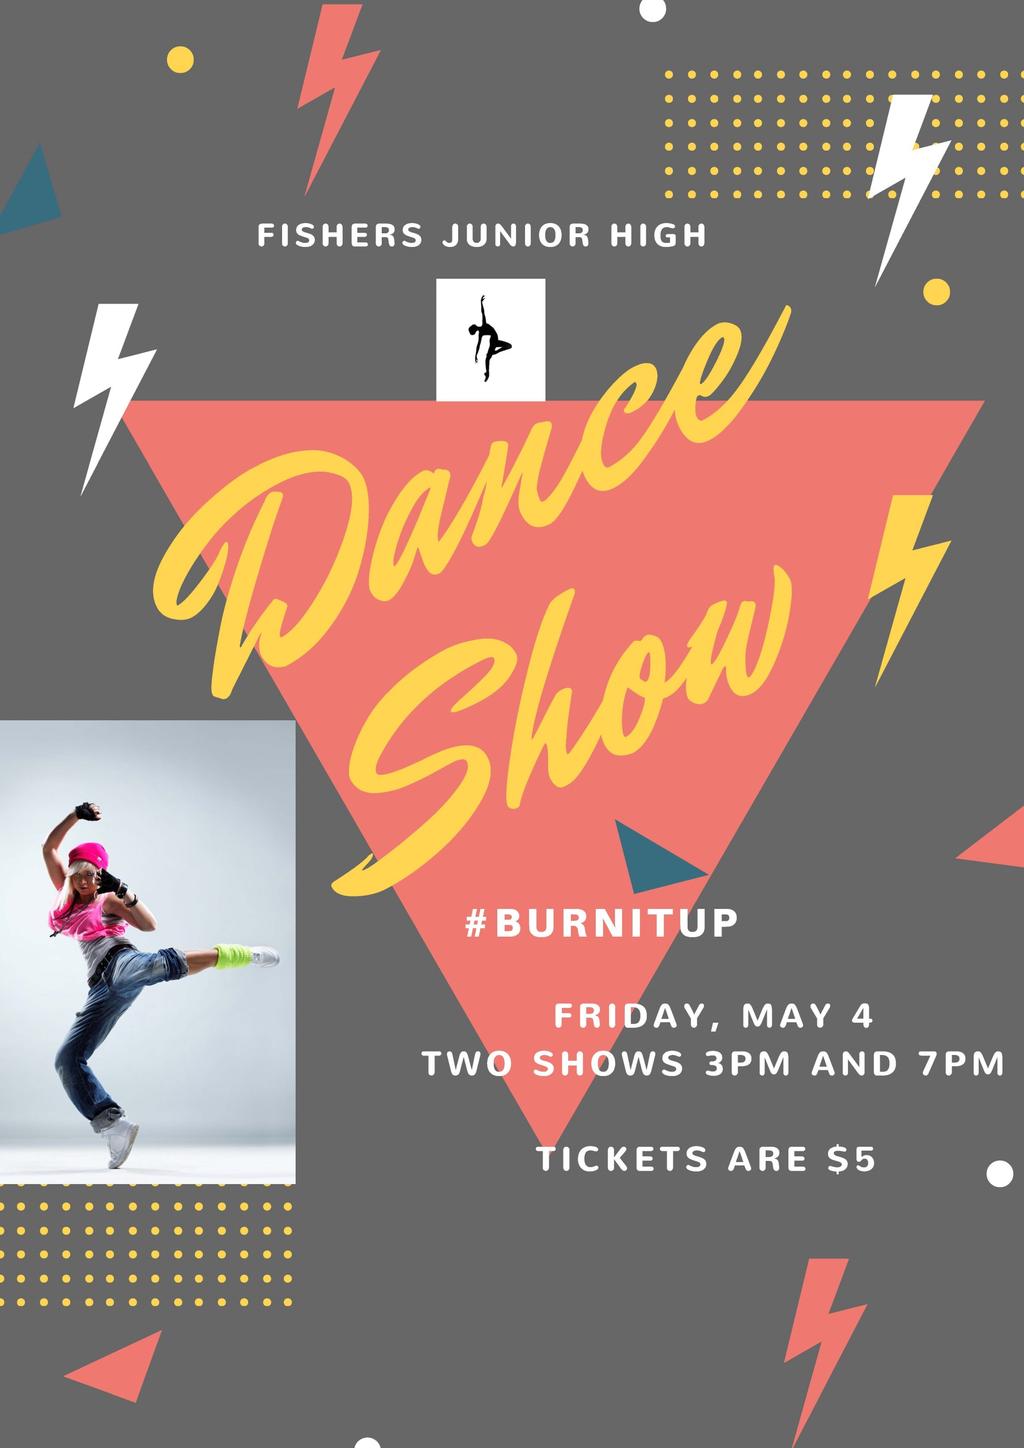 We cordially invite you to the Fishers Junior High Dance Show on Friday, May 4 th with two shows: one at 3pm and one at 7pm.